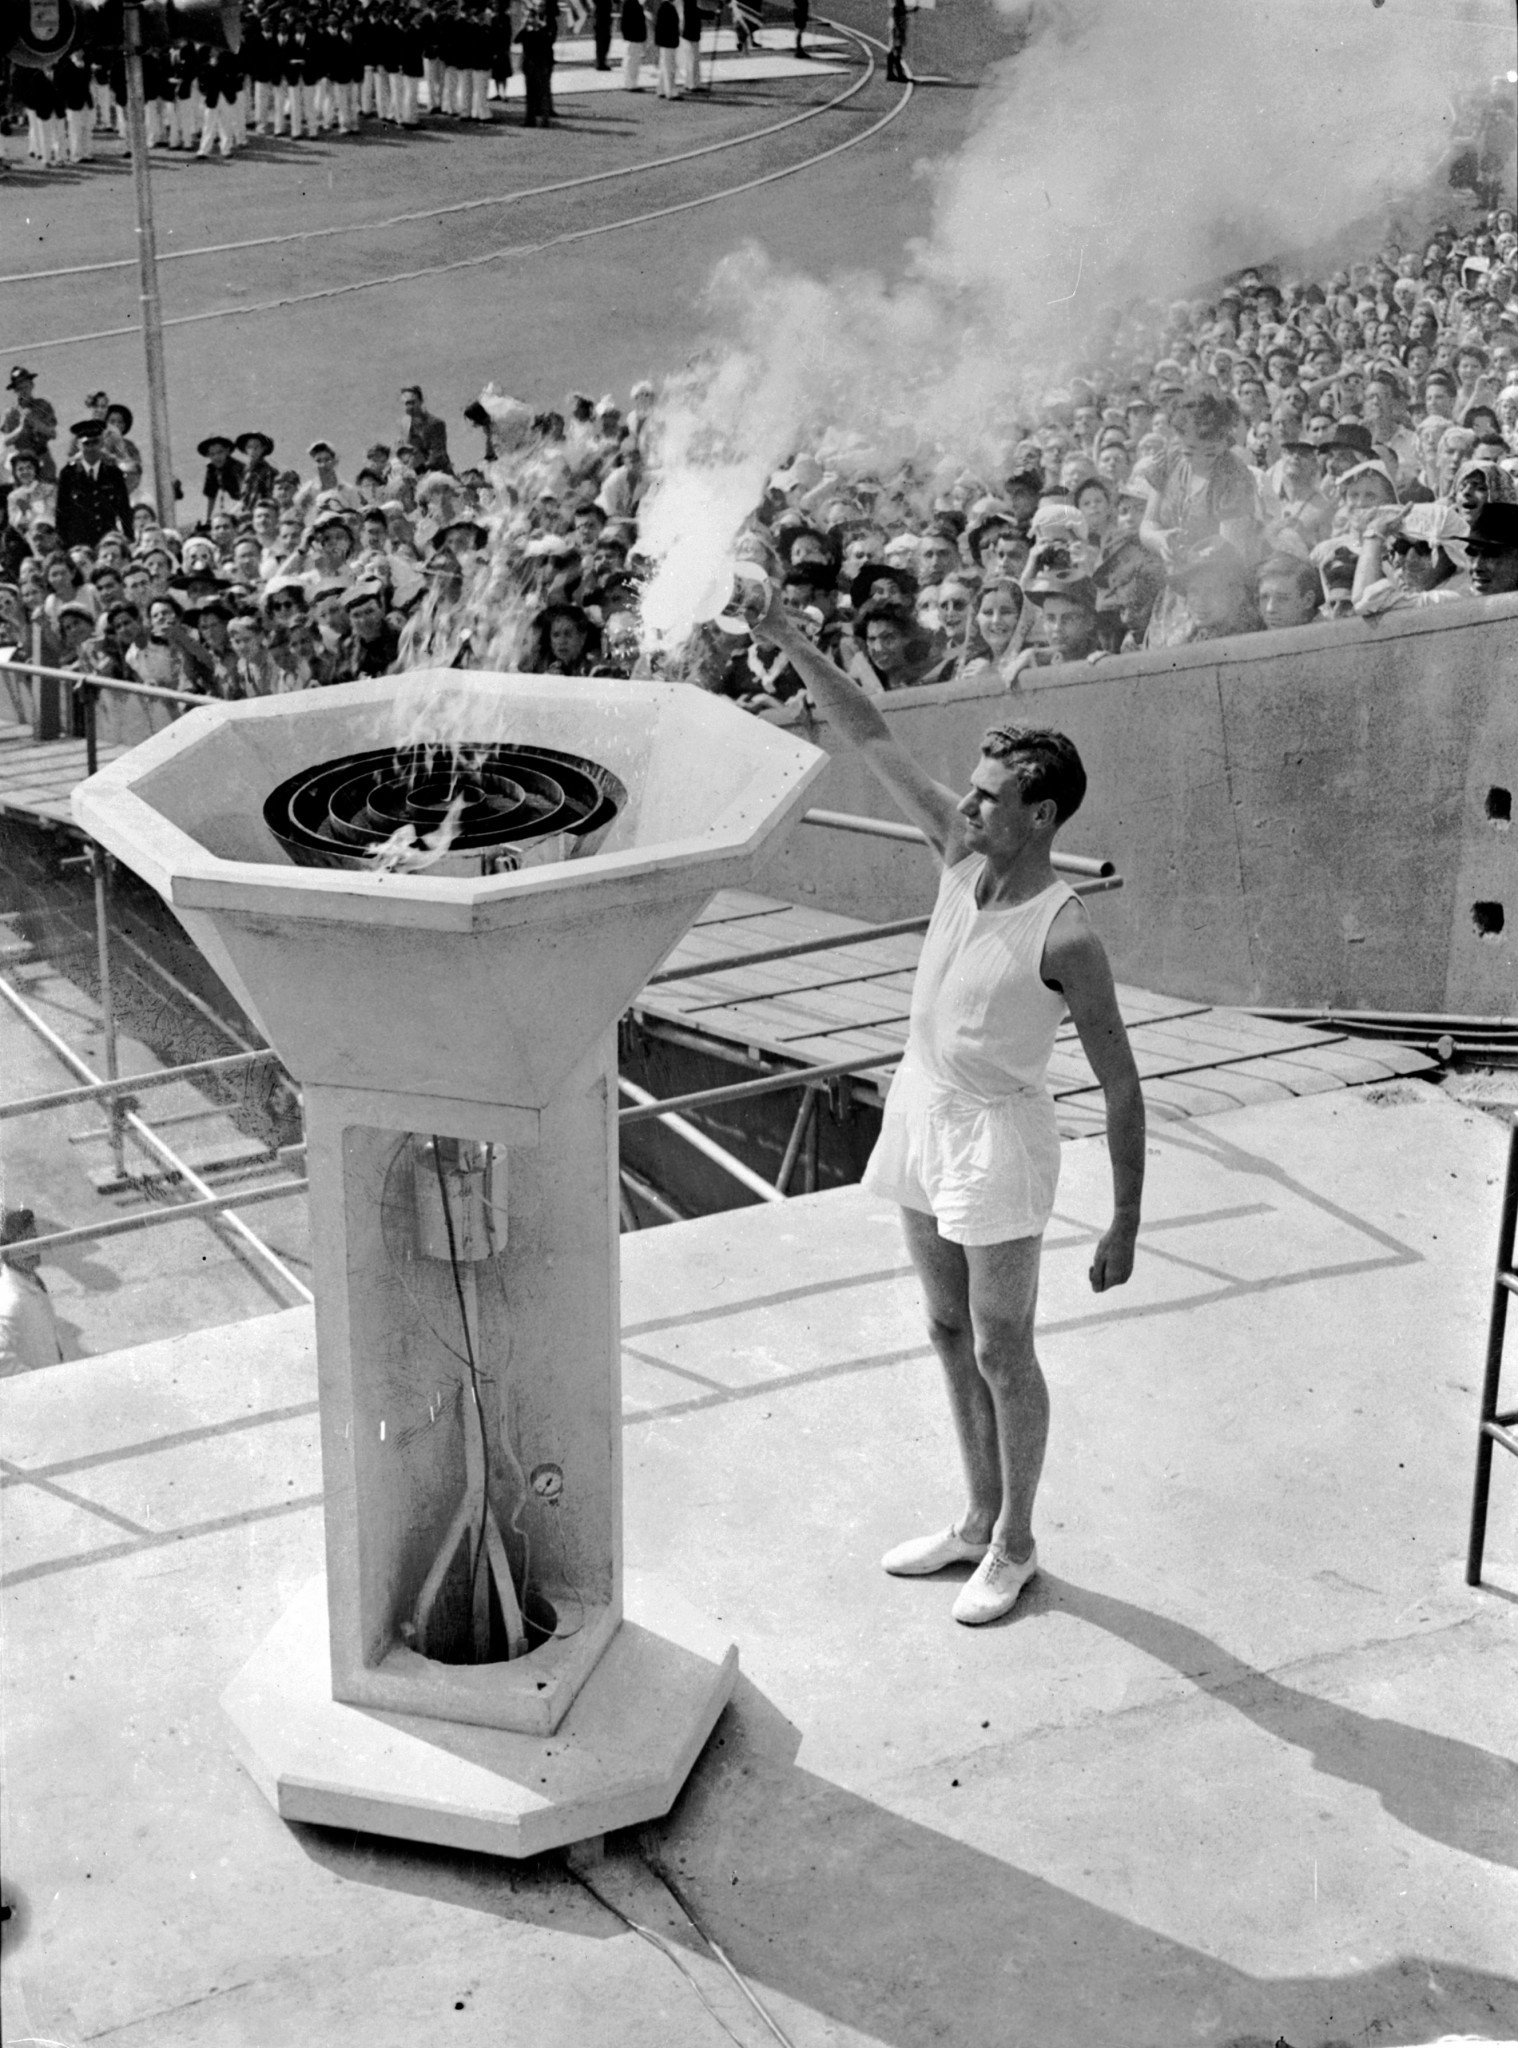 The Olympic Torch is lit at the London 1948 Games ©Getty Images